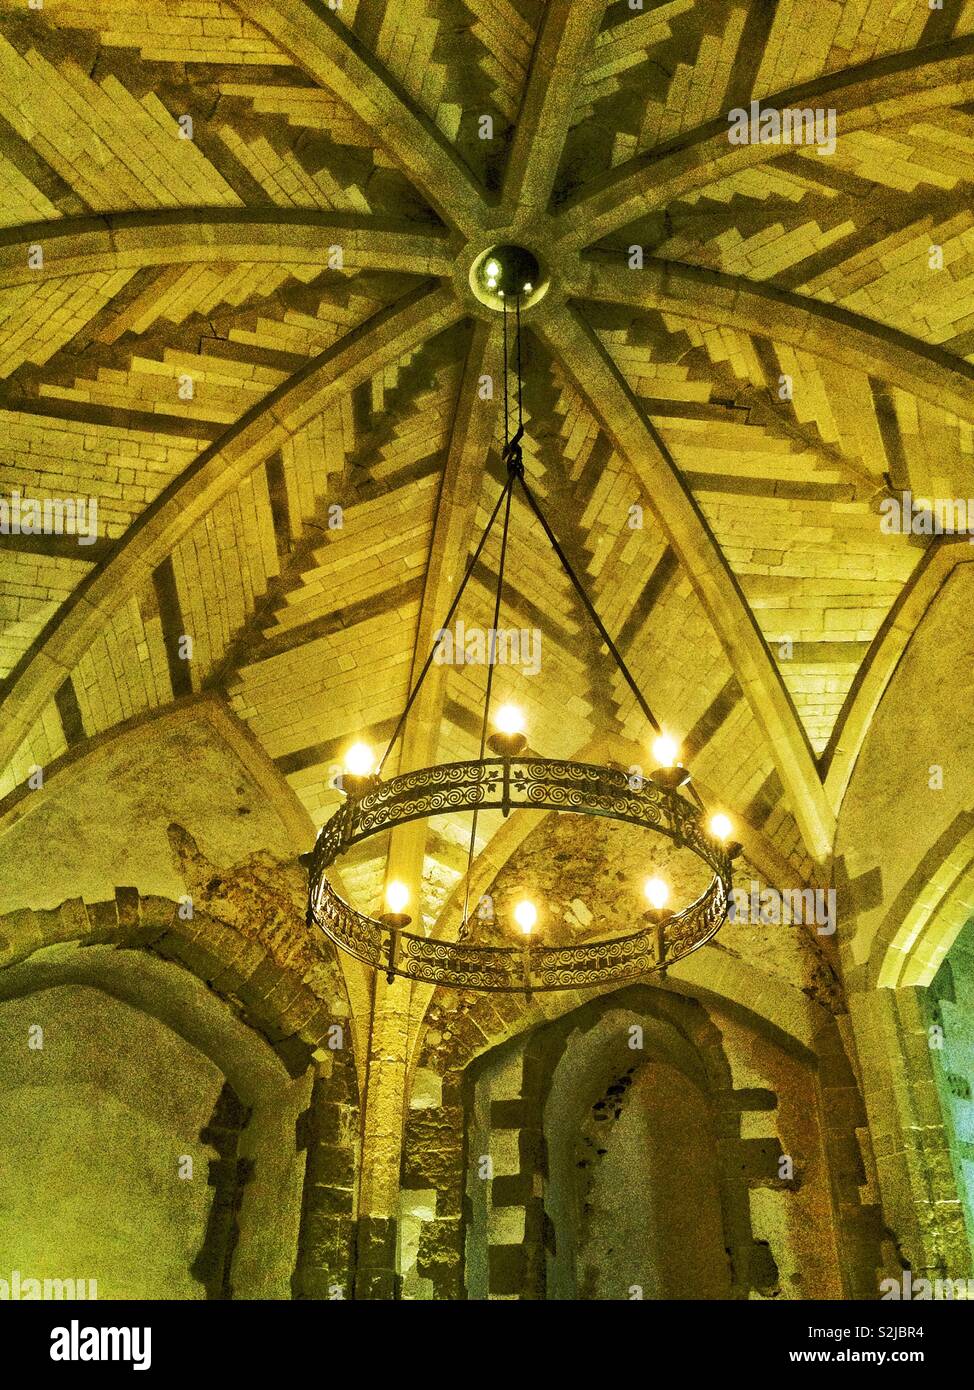 Detail of the ornate medieval vaulted ceiling of the 13th century Wakefield Tower in the Tower of London, England, UK. Stock Photo